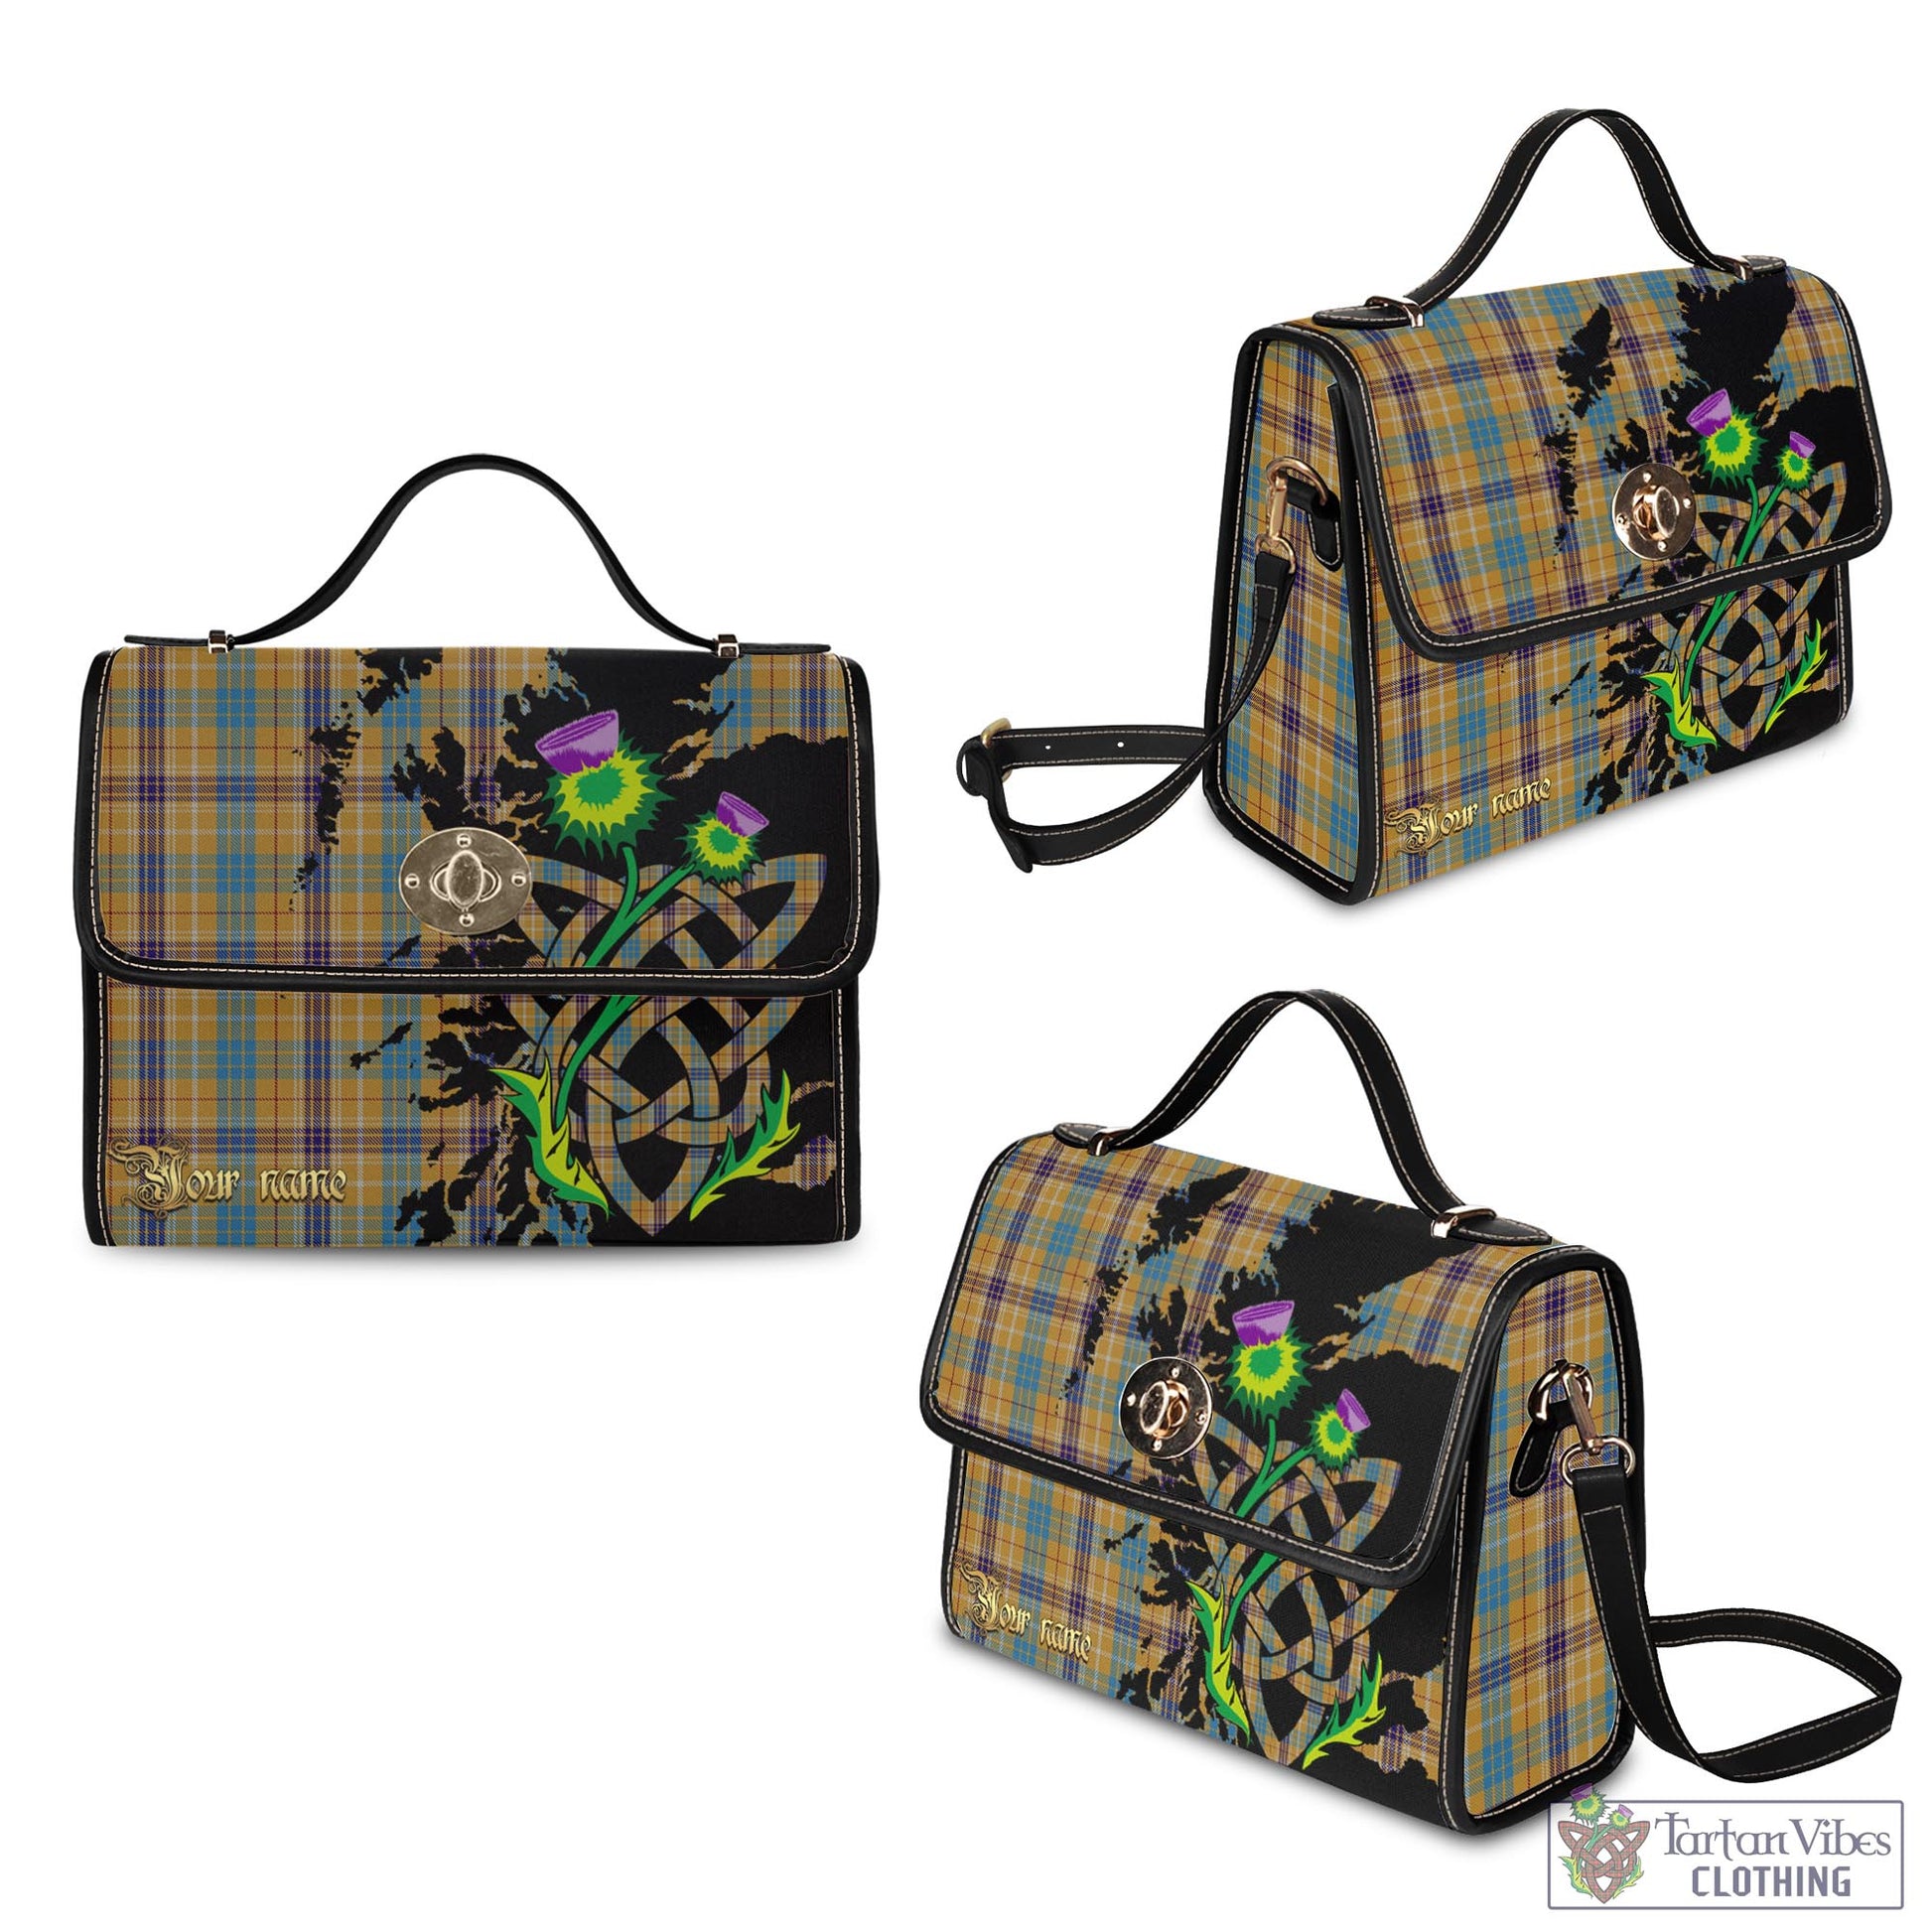 Tartan Vibes Clothing Ottawa Canada Tartan Waterproof Canvas Bag with Scotland Map and Thistle Celtic Accents